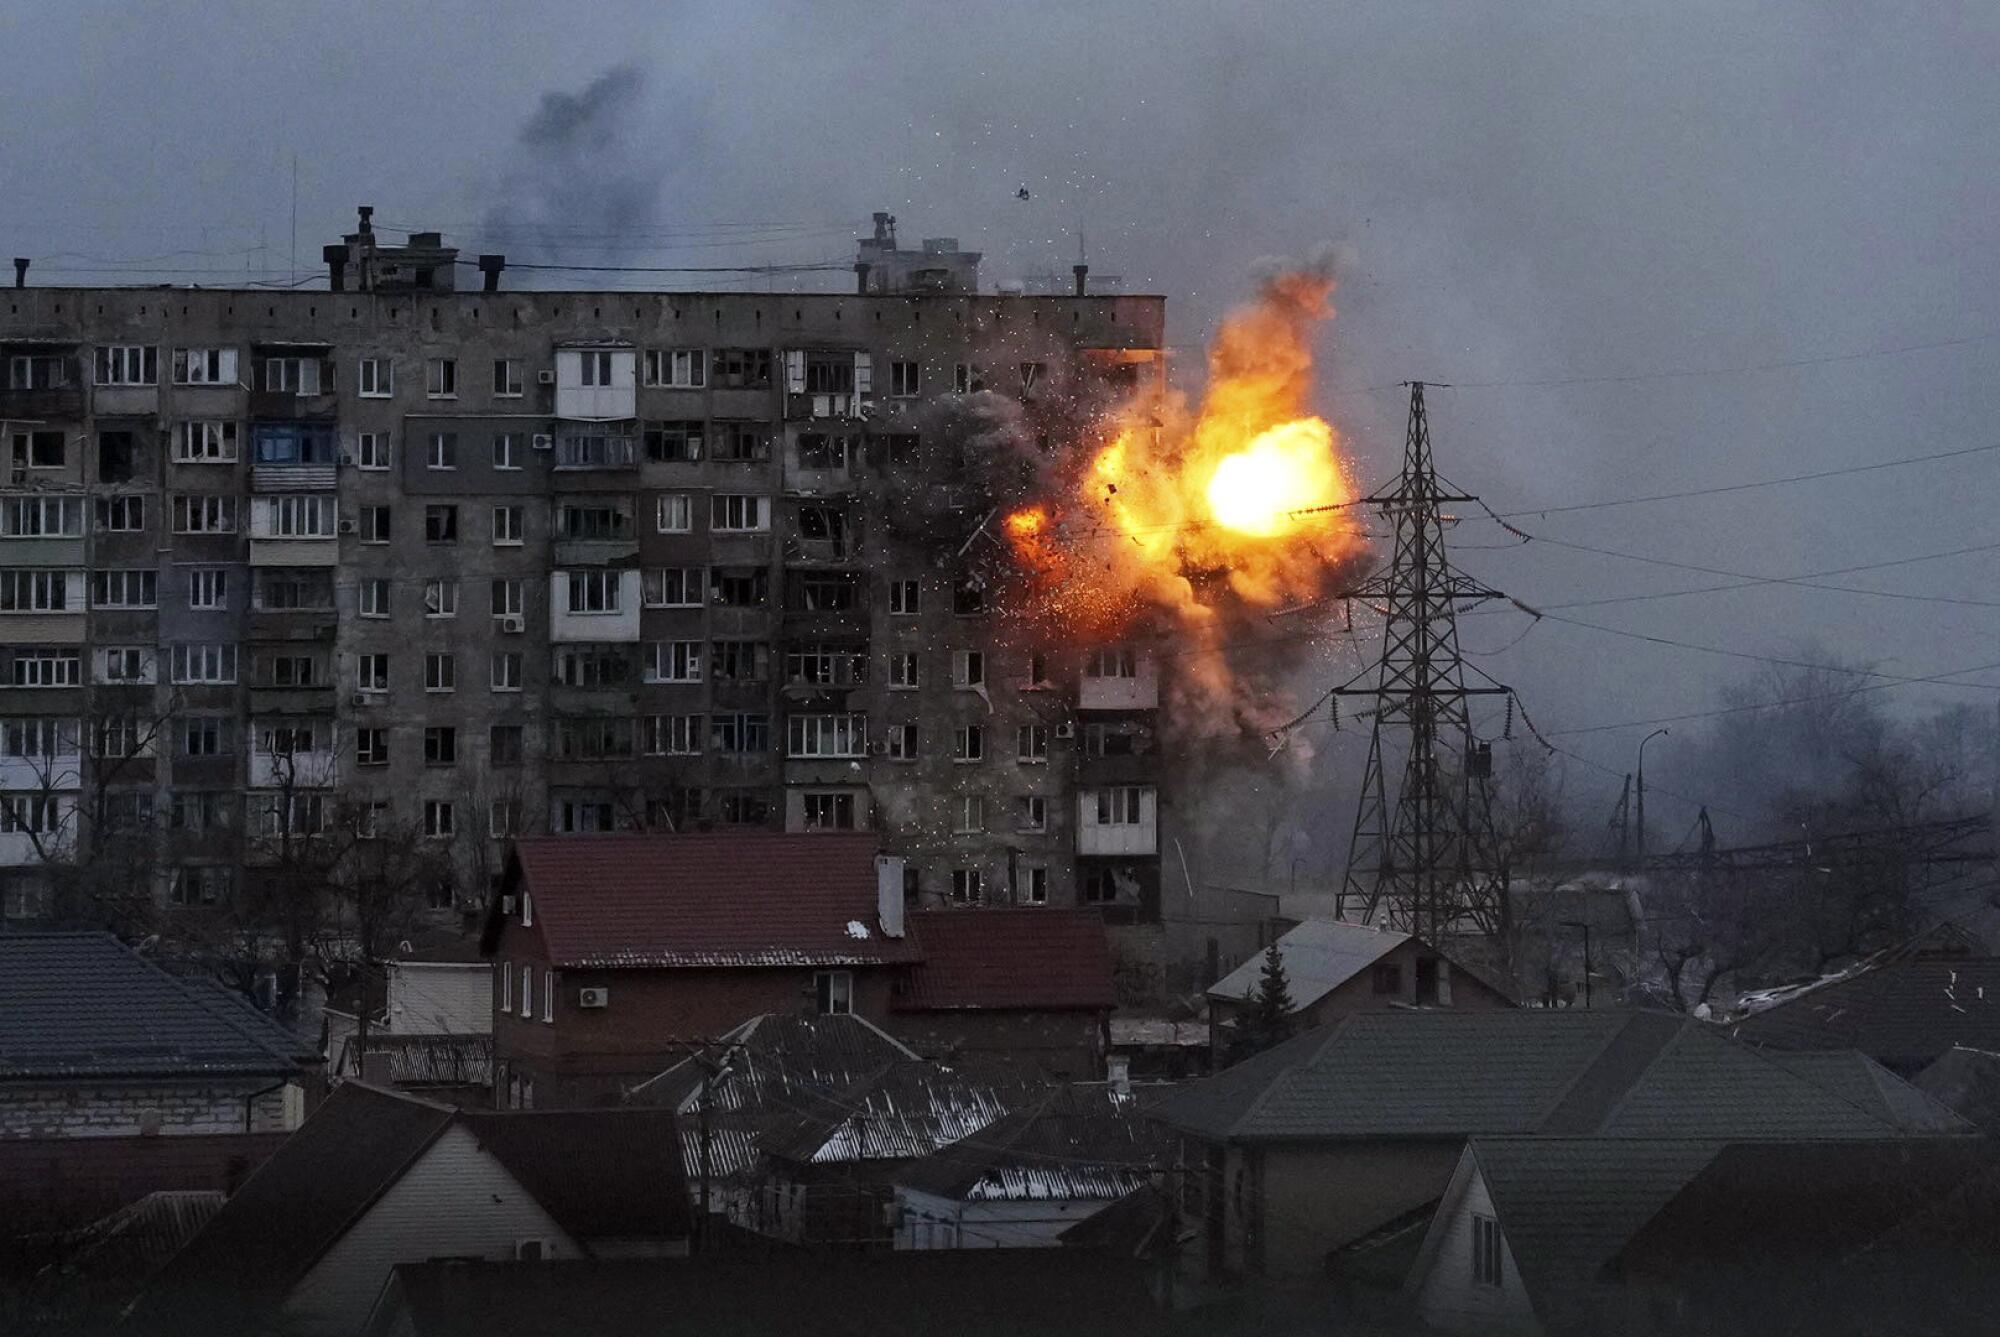 An explosion is seen in an apartment building after Russian's army tank fires in Mariupol, Ukraine, Friday, March 11, 2022.